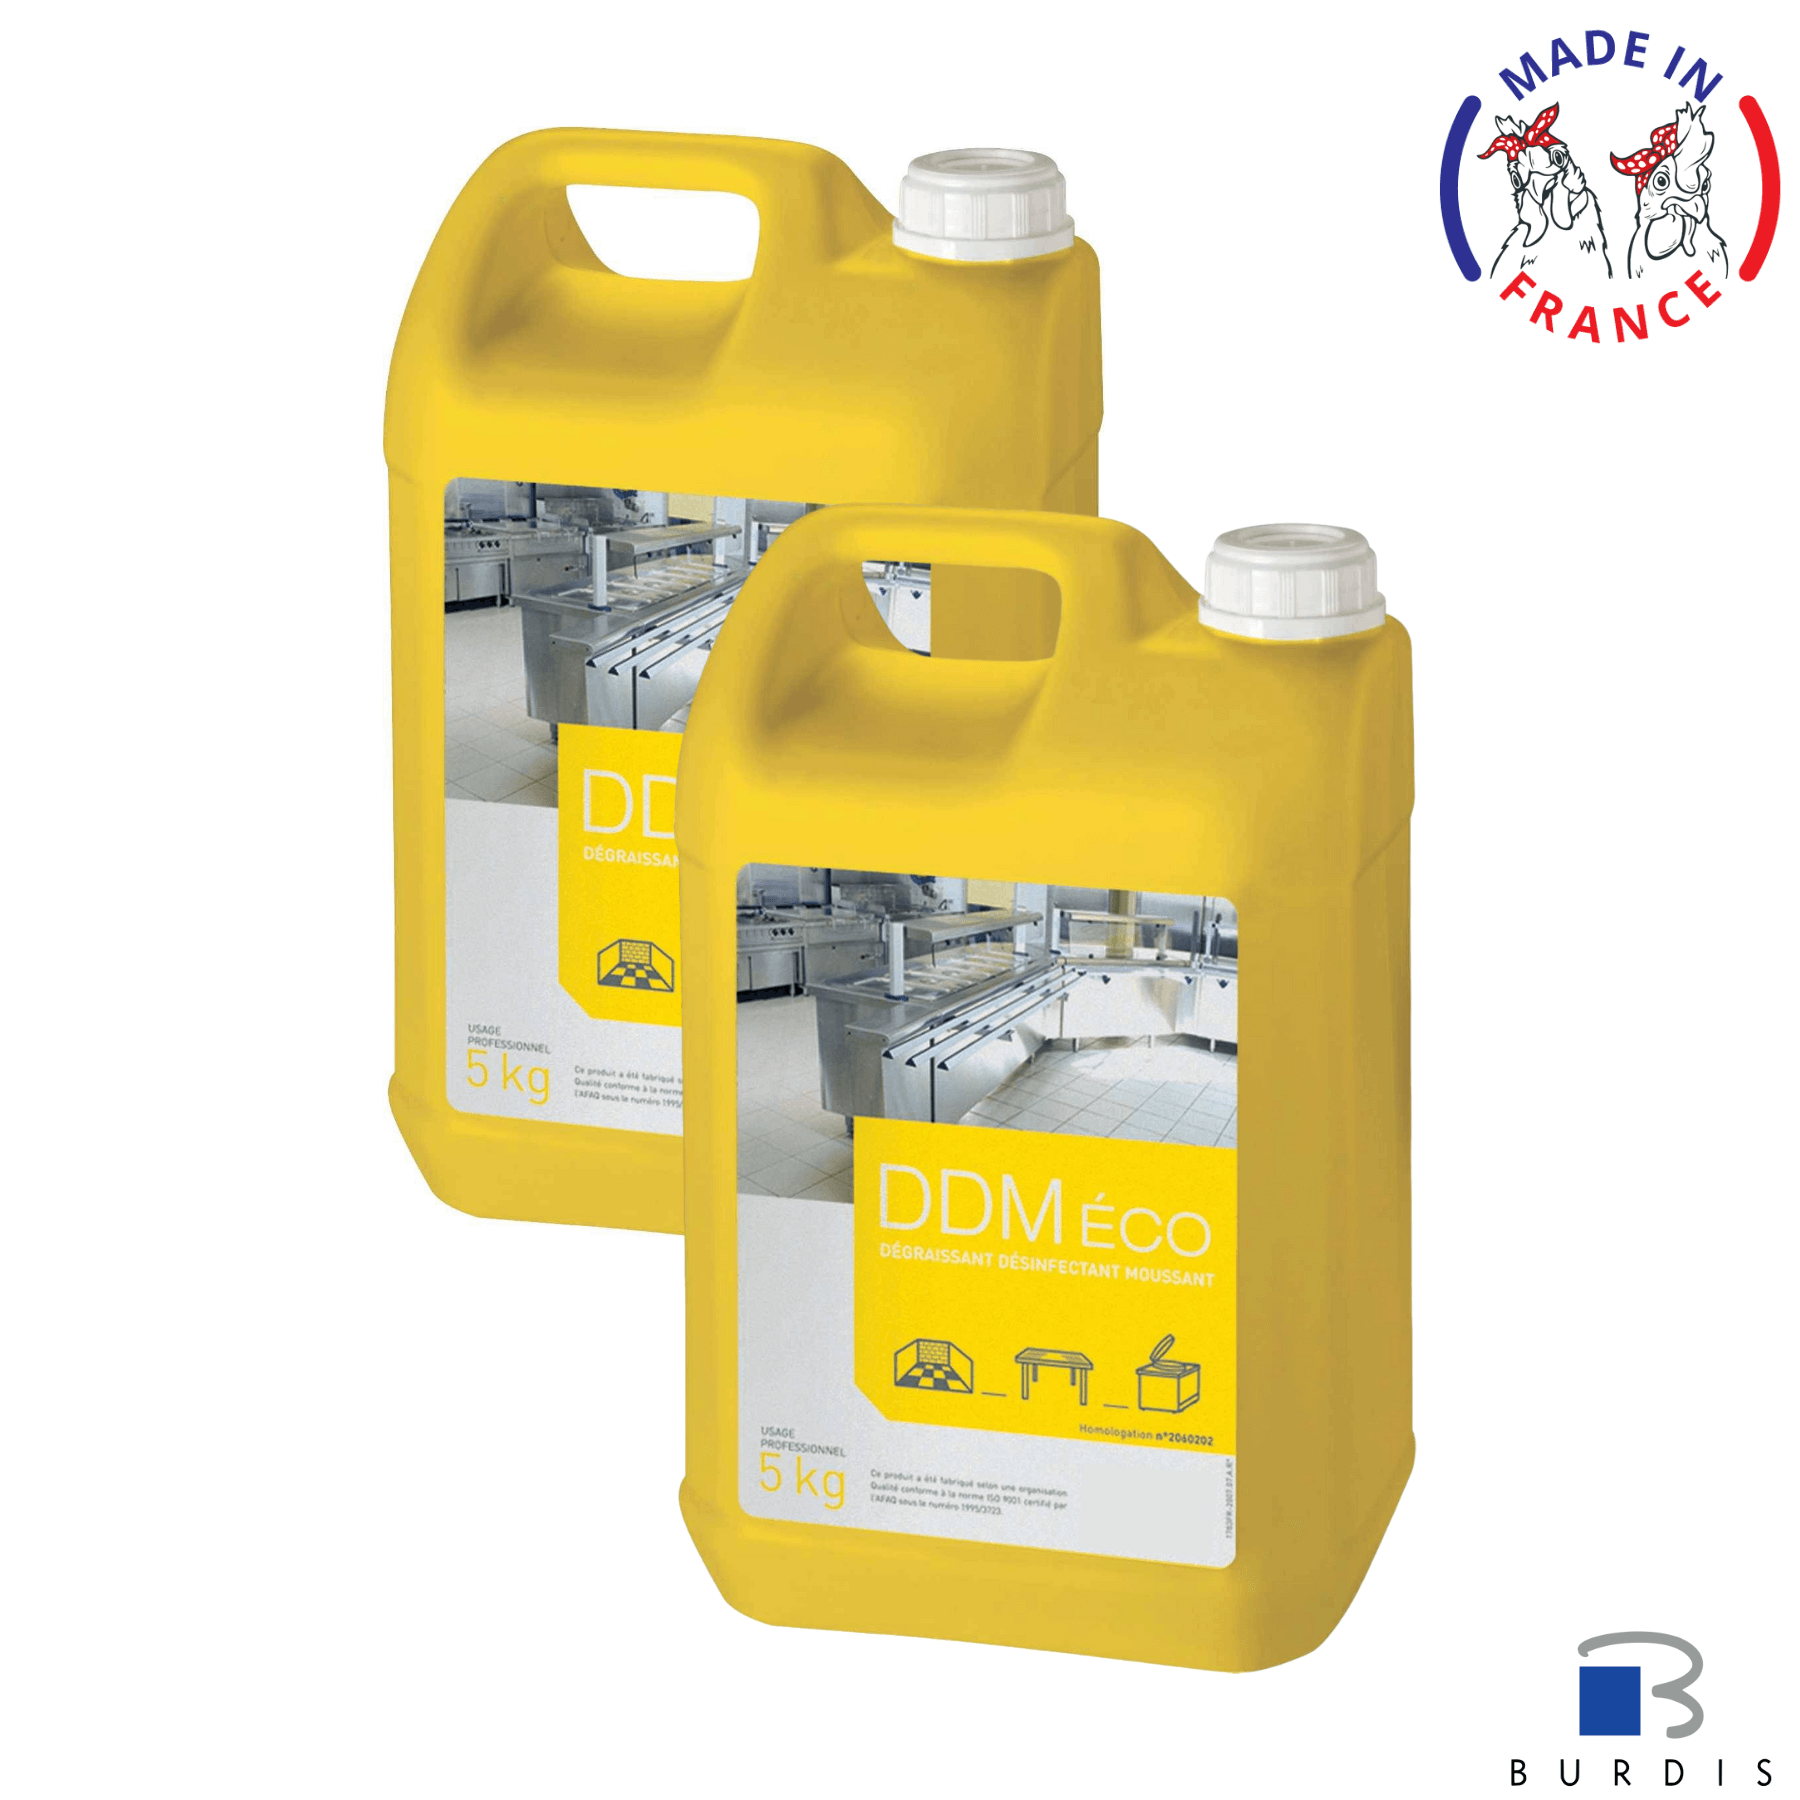 Disinfectant detergent for food industry pack of 2 x 5L Burdis Poultry